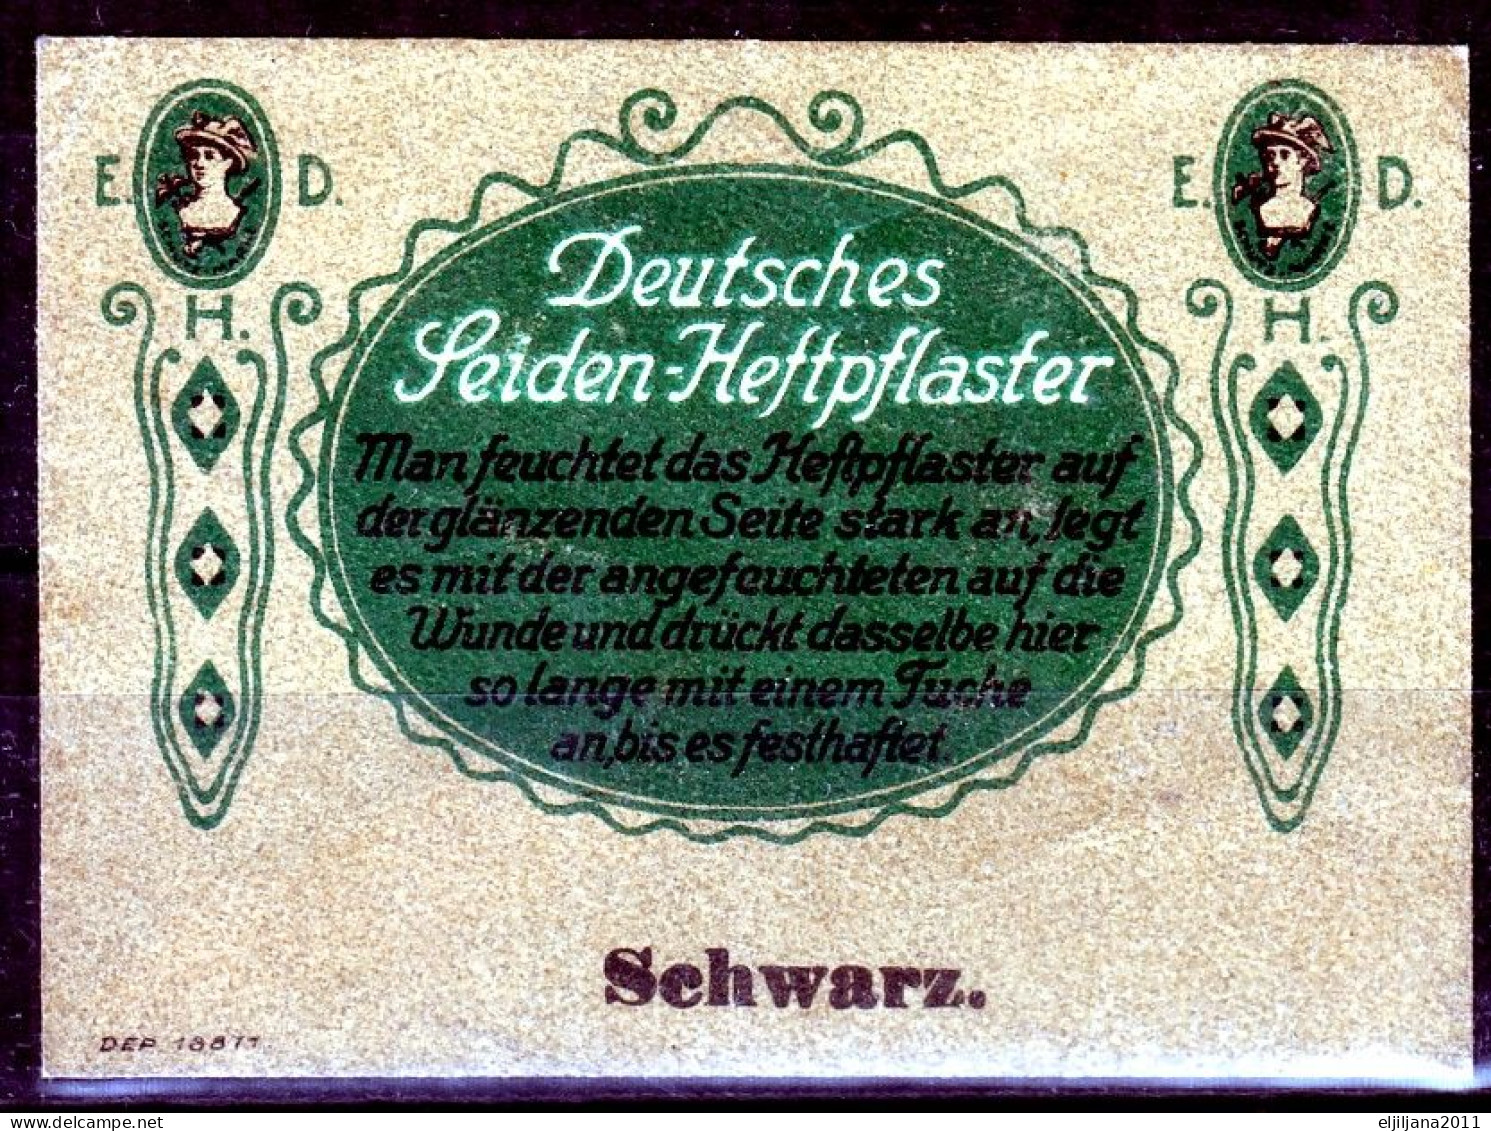 Deutsches Leiden Heftpflaster E.D.H. / Glassine Envelopes For Stamps ? Protective Bags 70 X 50 Mm / DEP 188/1 Schwarz - Clear Sleeves